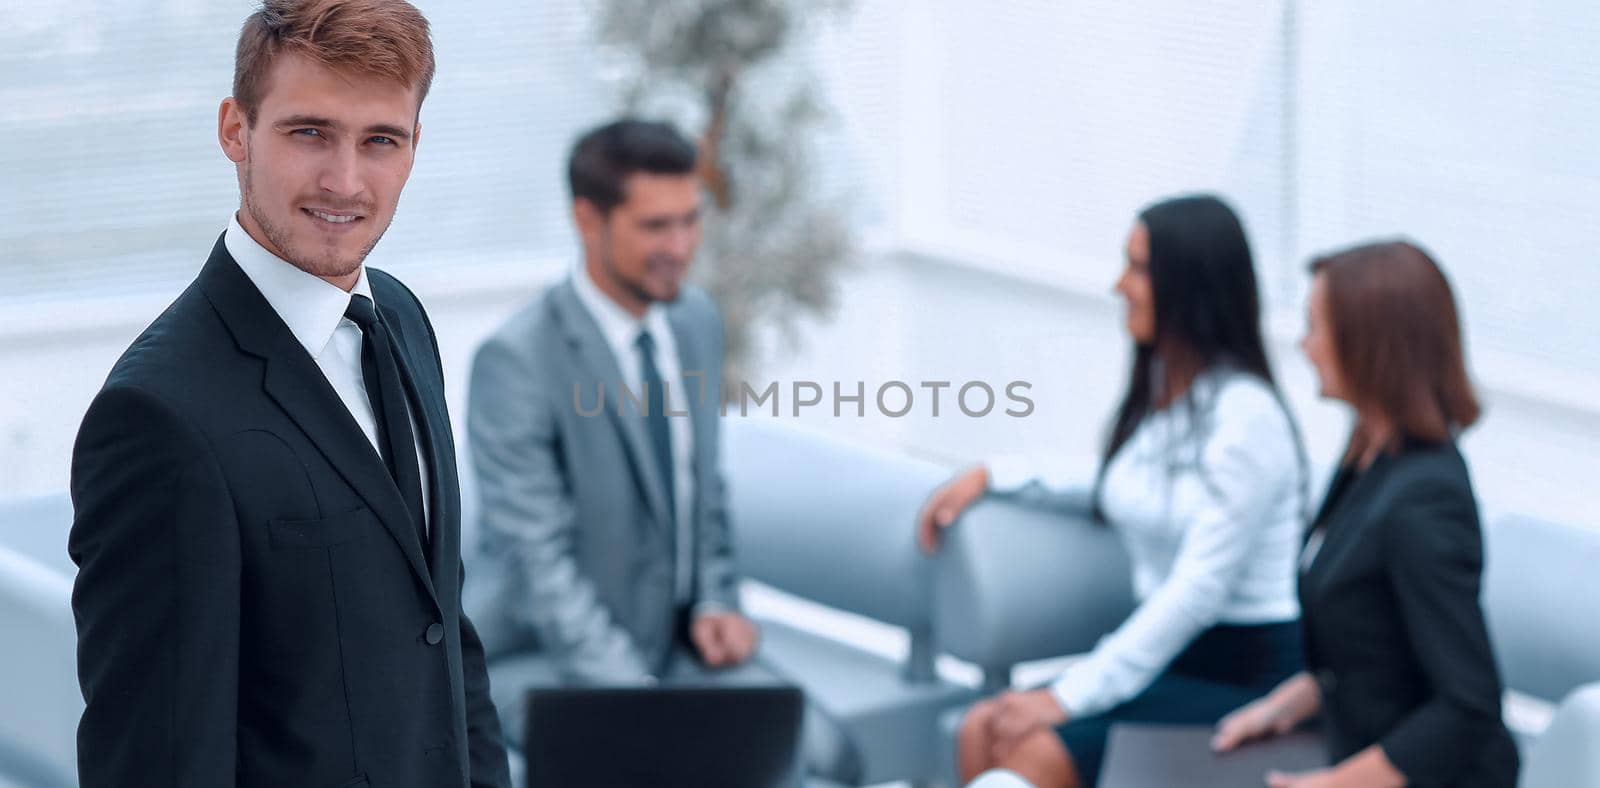 portrait of confident businessman on background of office. photo with copy space